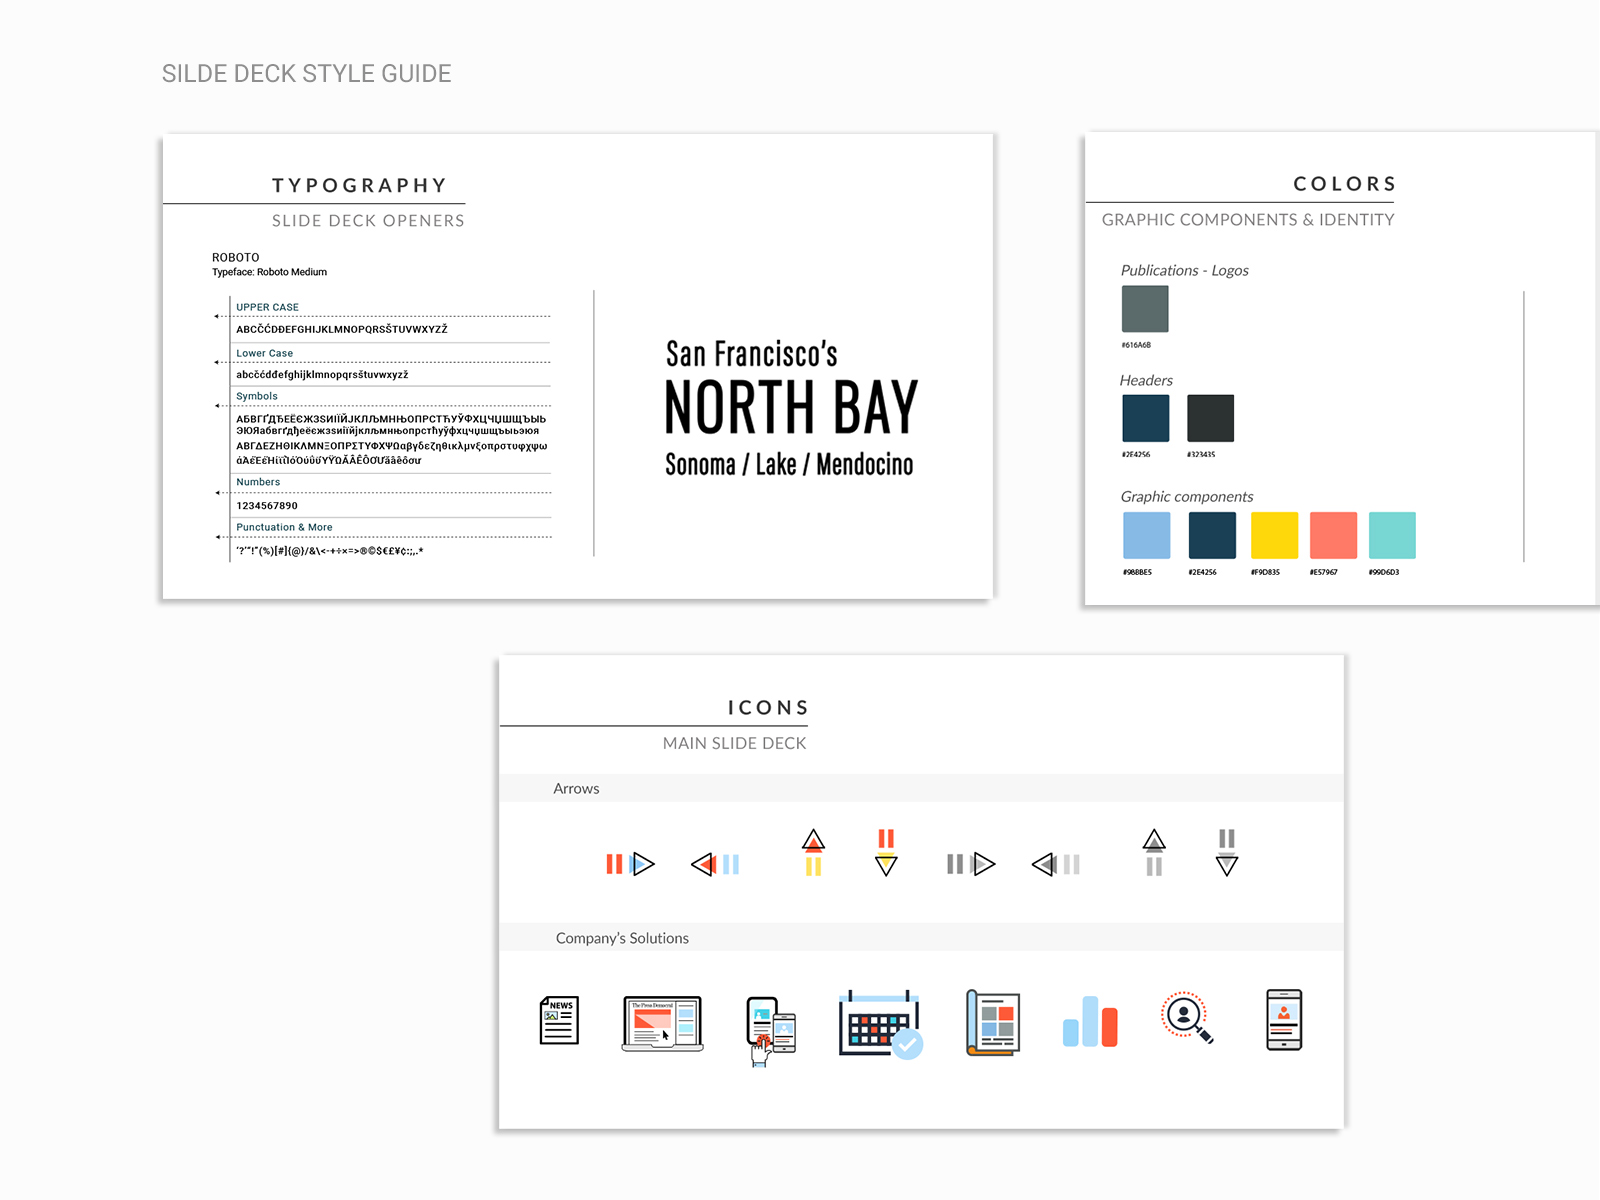 Slide Deck Style Guide